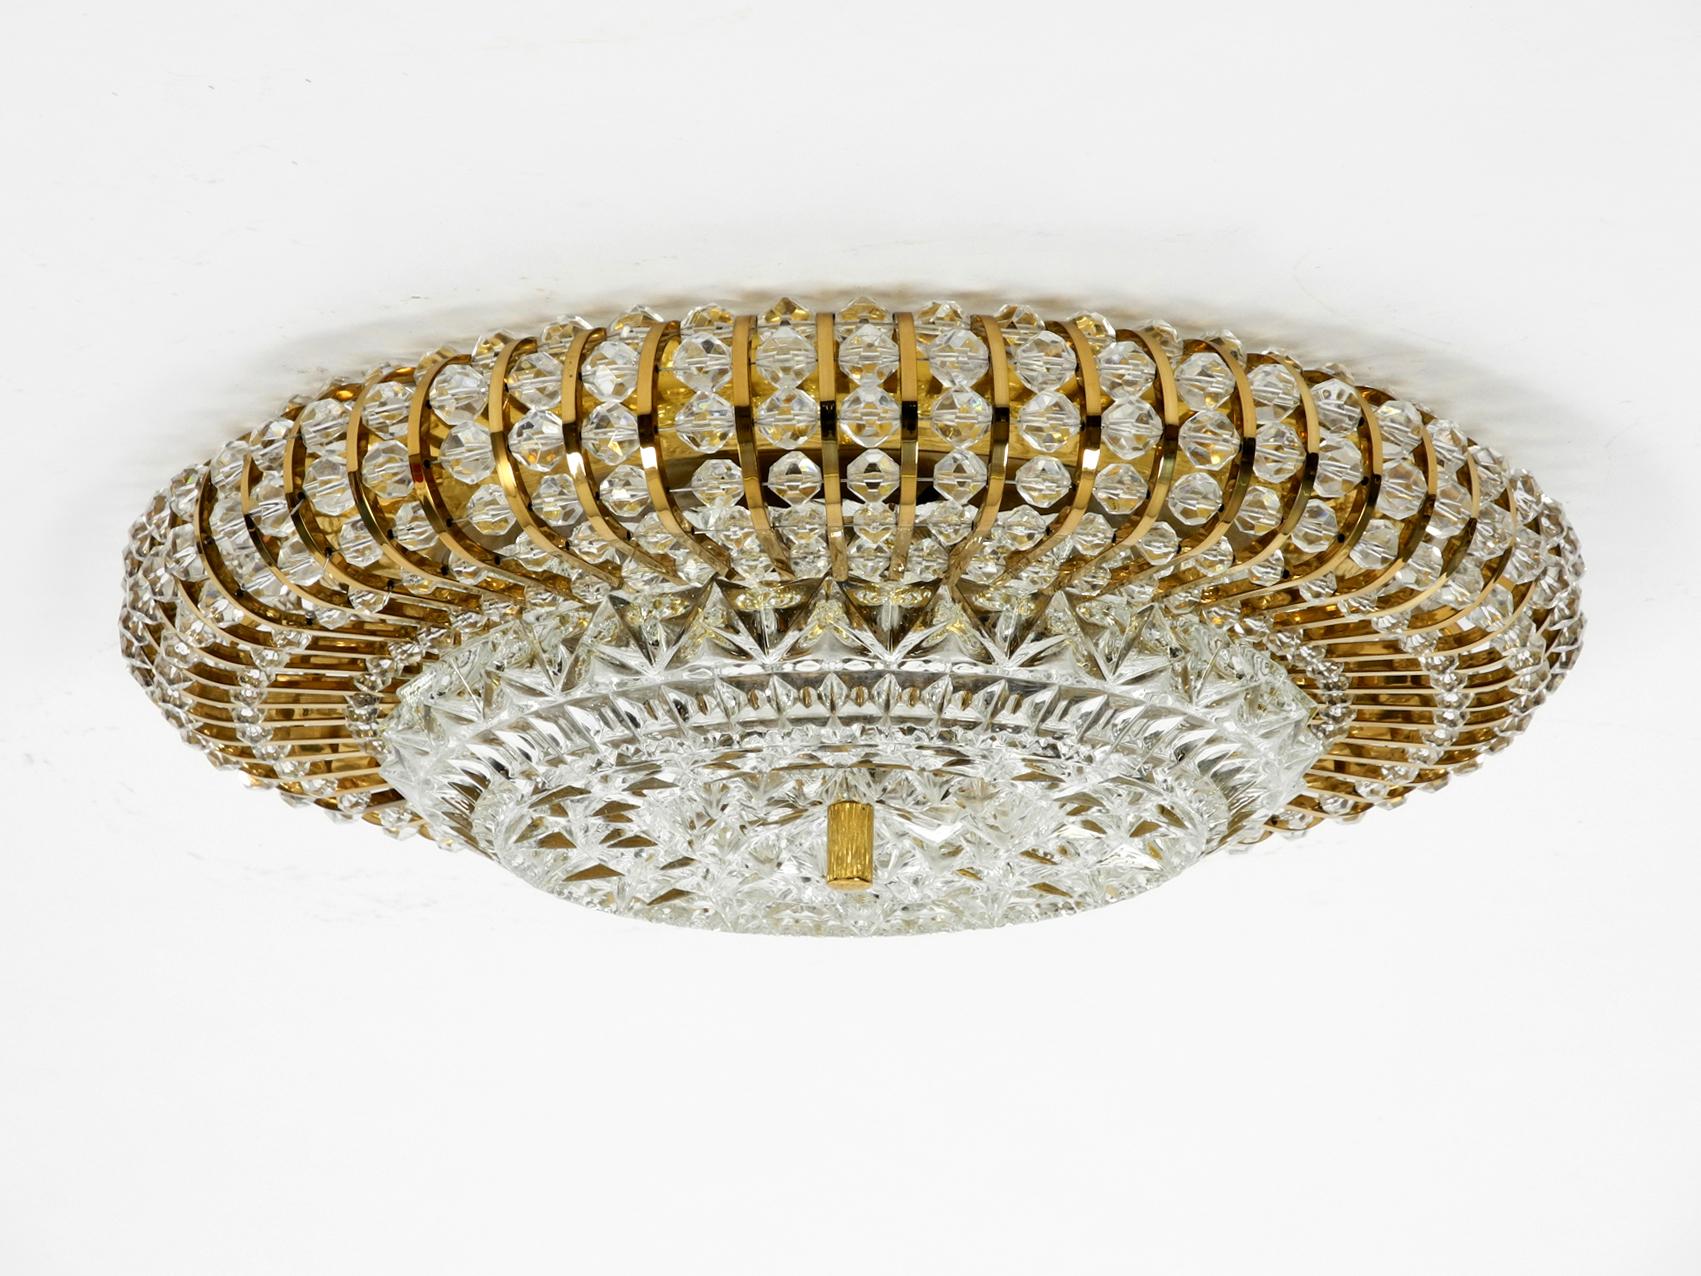 German Mid-Century Modern Ceiling Lamp with Glass Stones and Brass Frame from Palwa